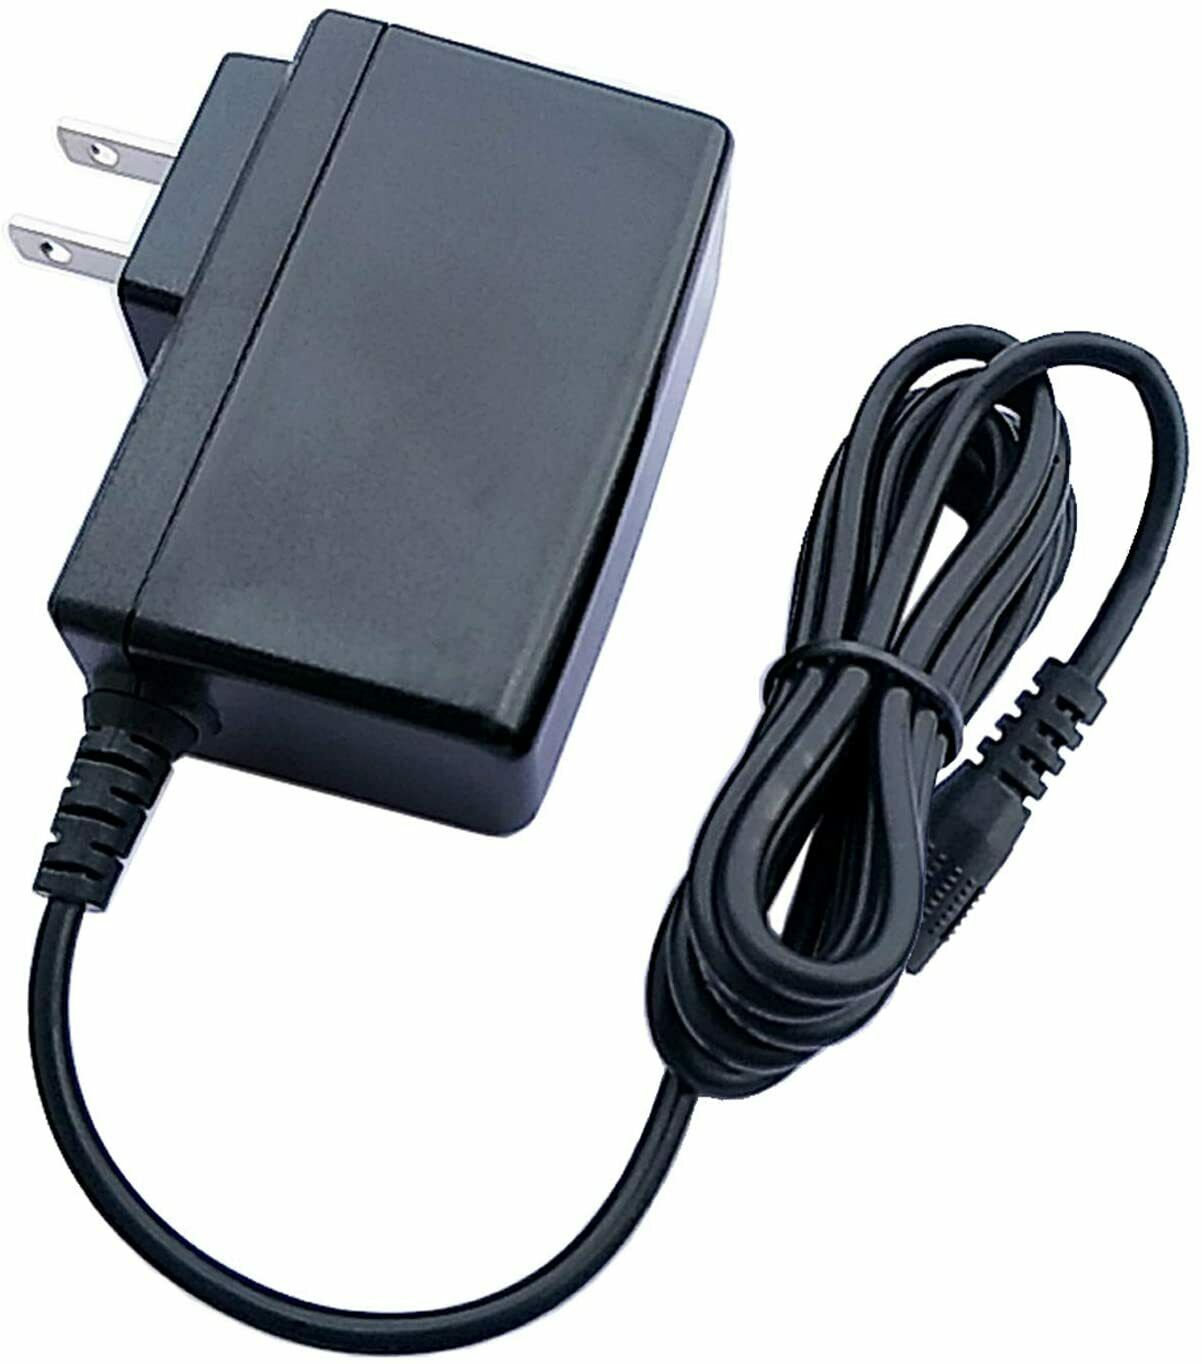 AC Adapter Charger For Bissell 2003 2003A 2164A Pet Stain Eraser Power Supply Specifications: Type: AC to DC Standard